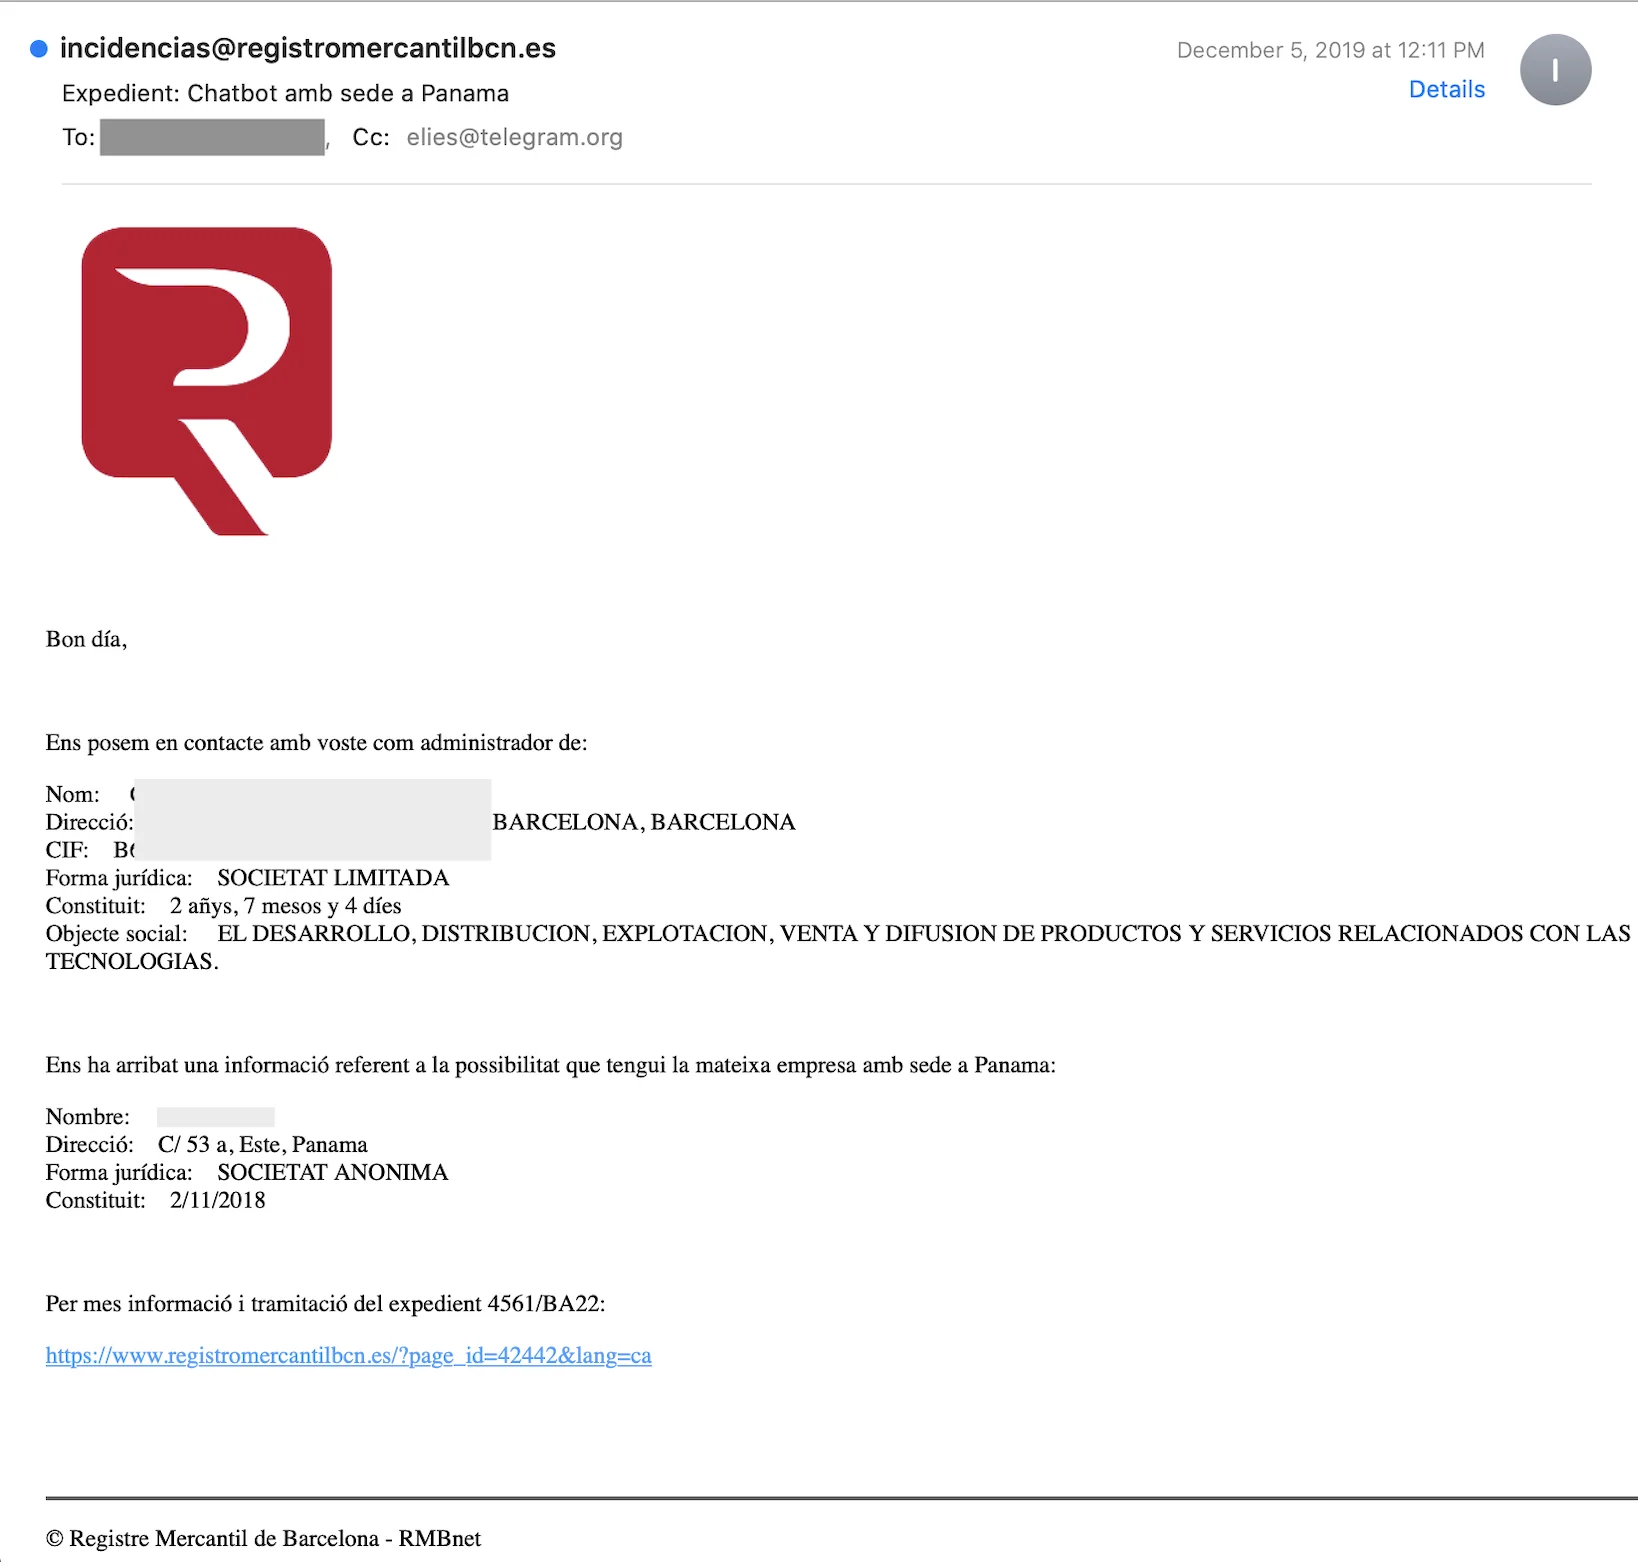 Fake “Barcelona's Mercantile Registry” email. Clicking on the link would result in the infection of the device with Candiru spyware.